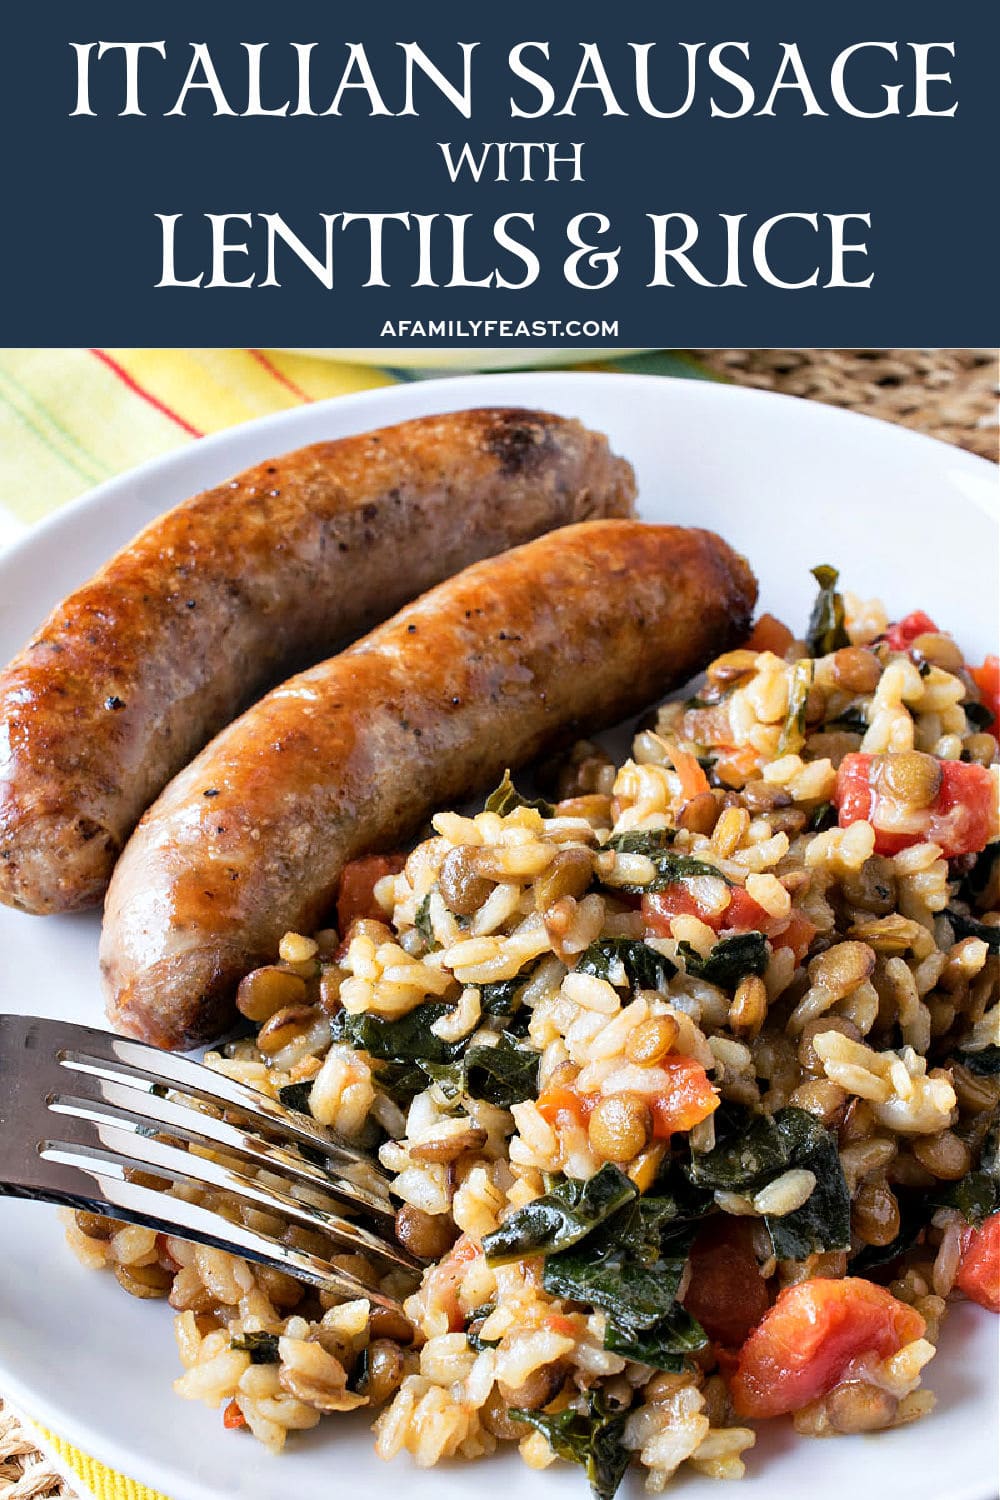 Italian Sausage with Lentils & Rice 